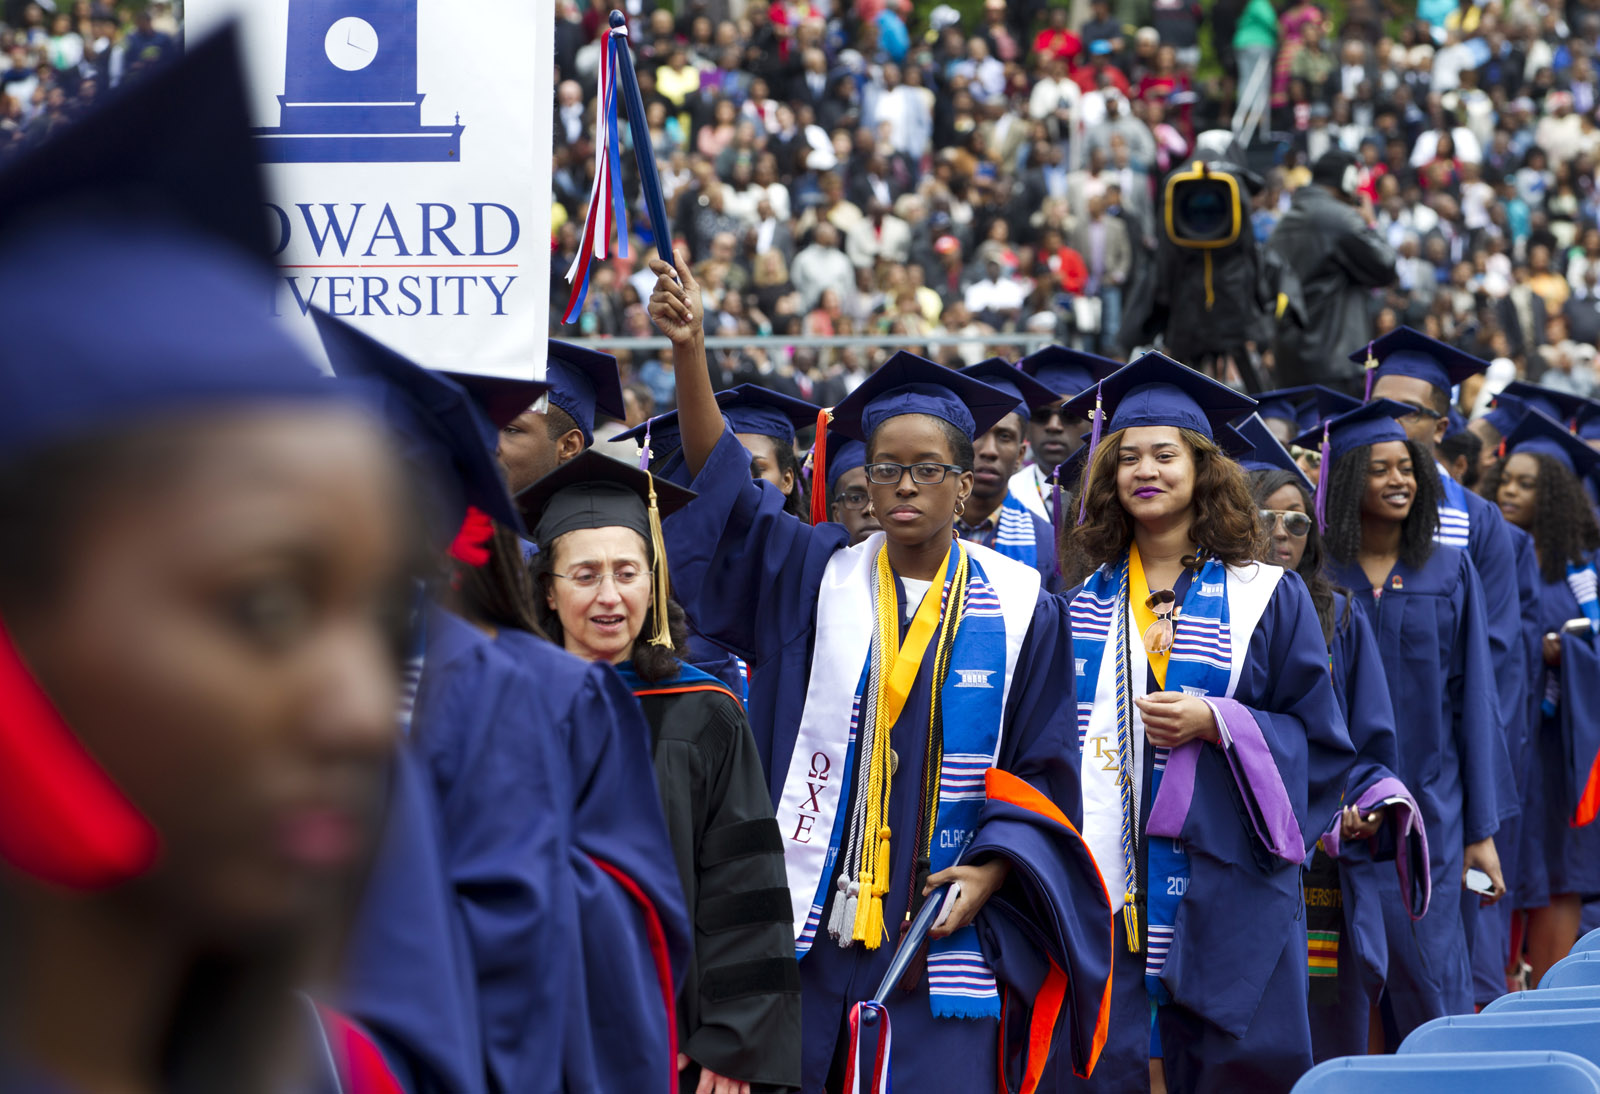 Festivities get under way this weekend for several schools around the area, including Howard University. (AP/Jose Luis Magana, file)